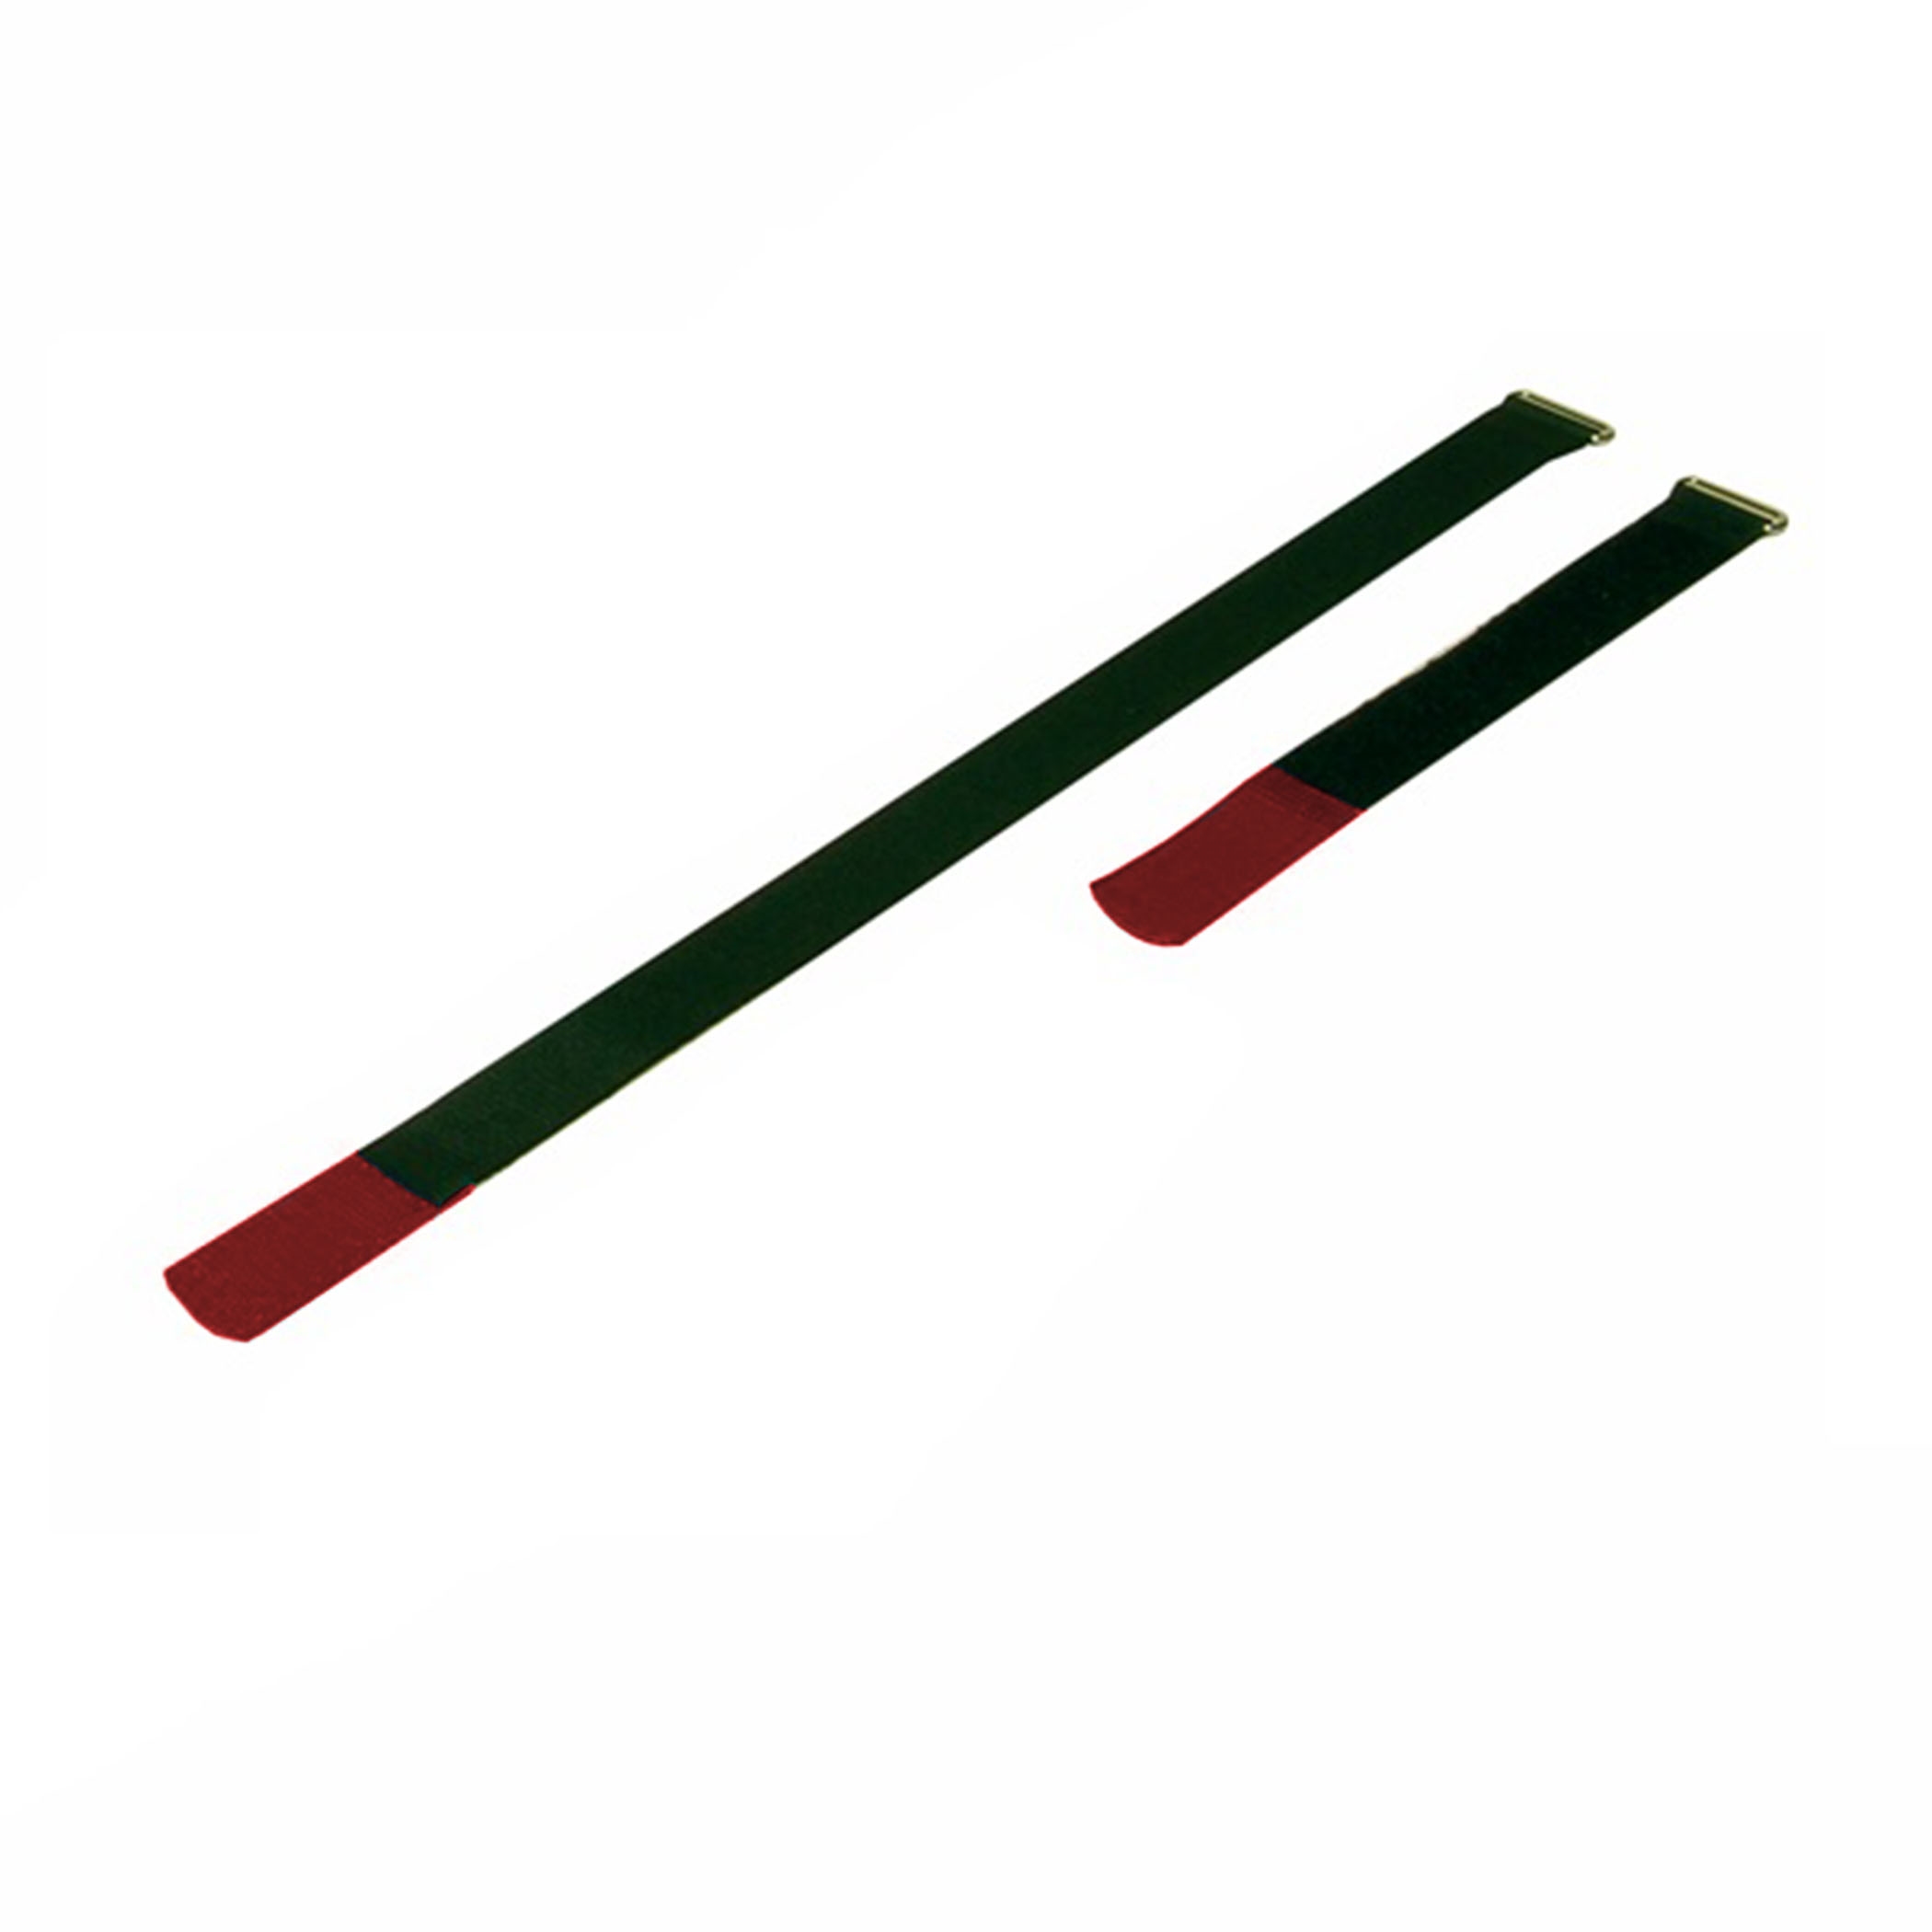 Cable Tie 170x25mm with Hook Red, (10 pieces) - a2517-600h